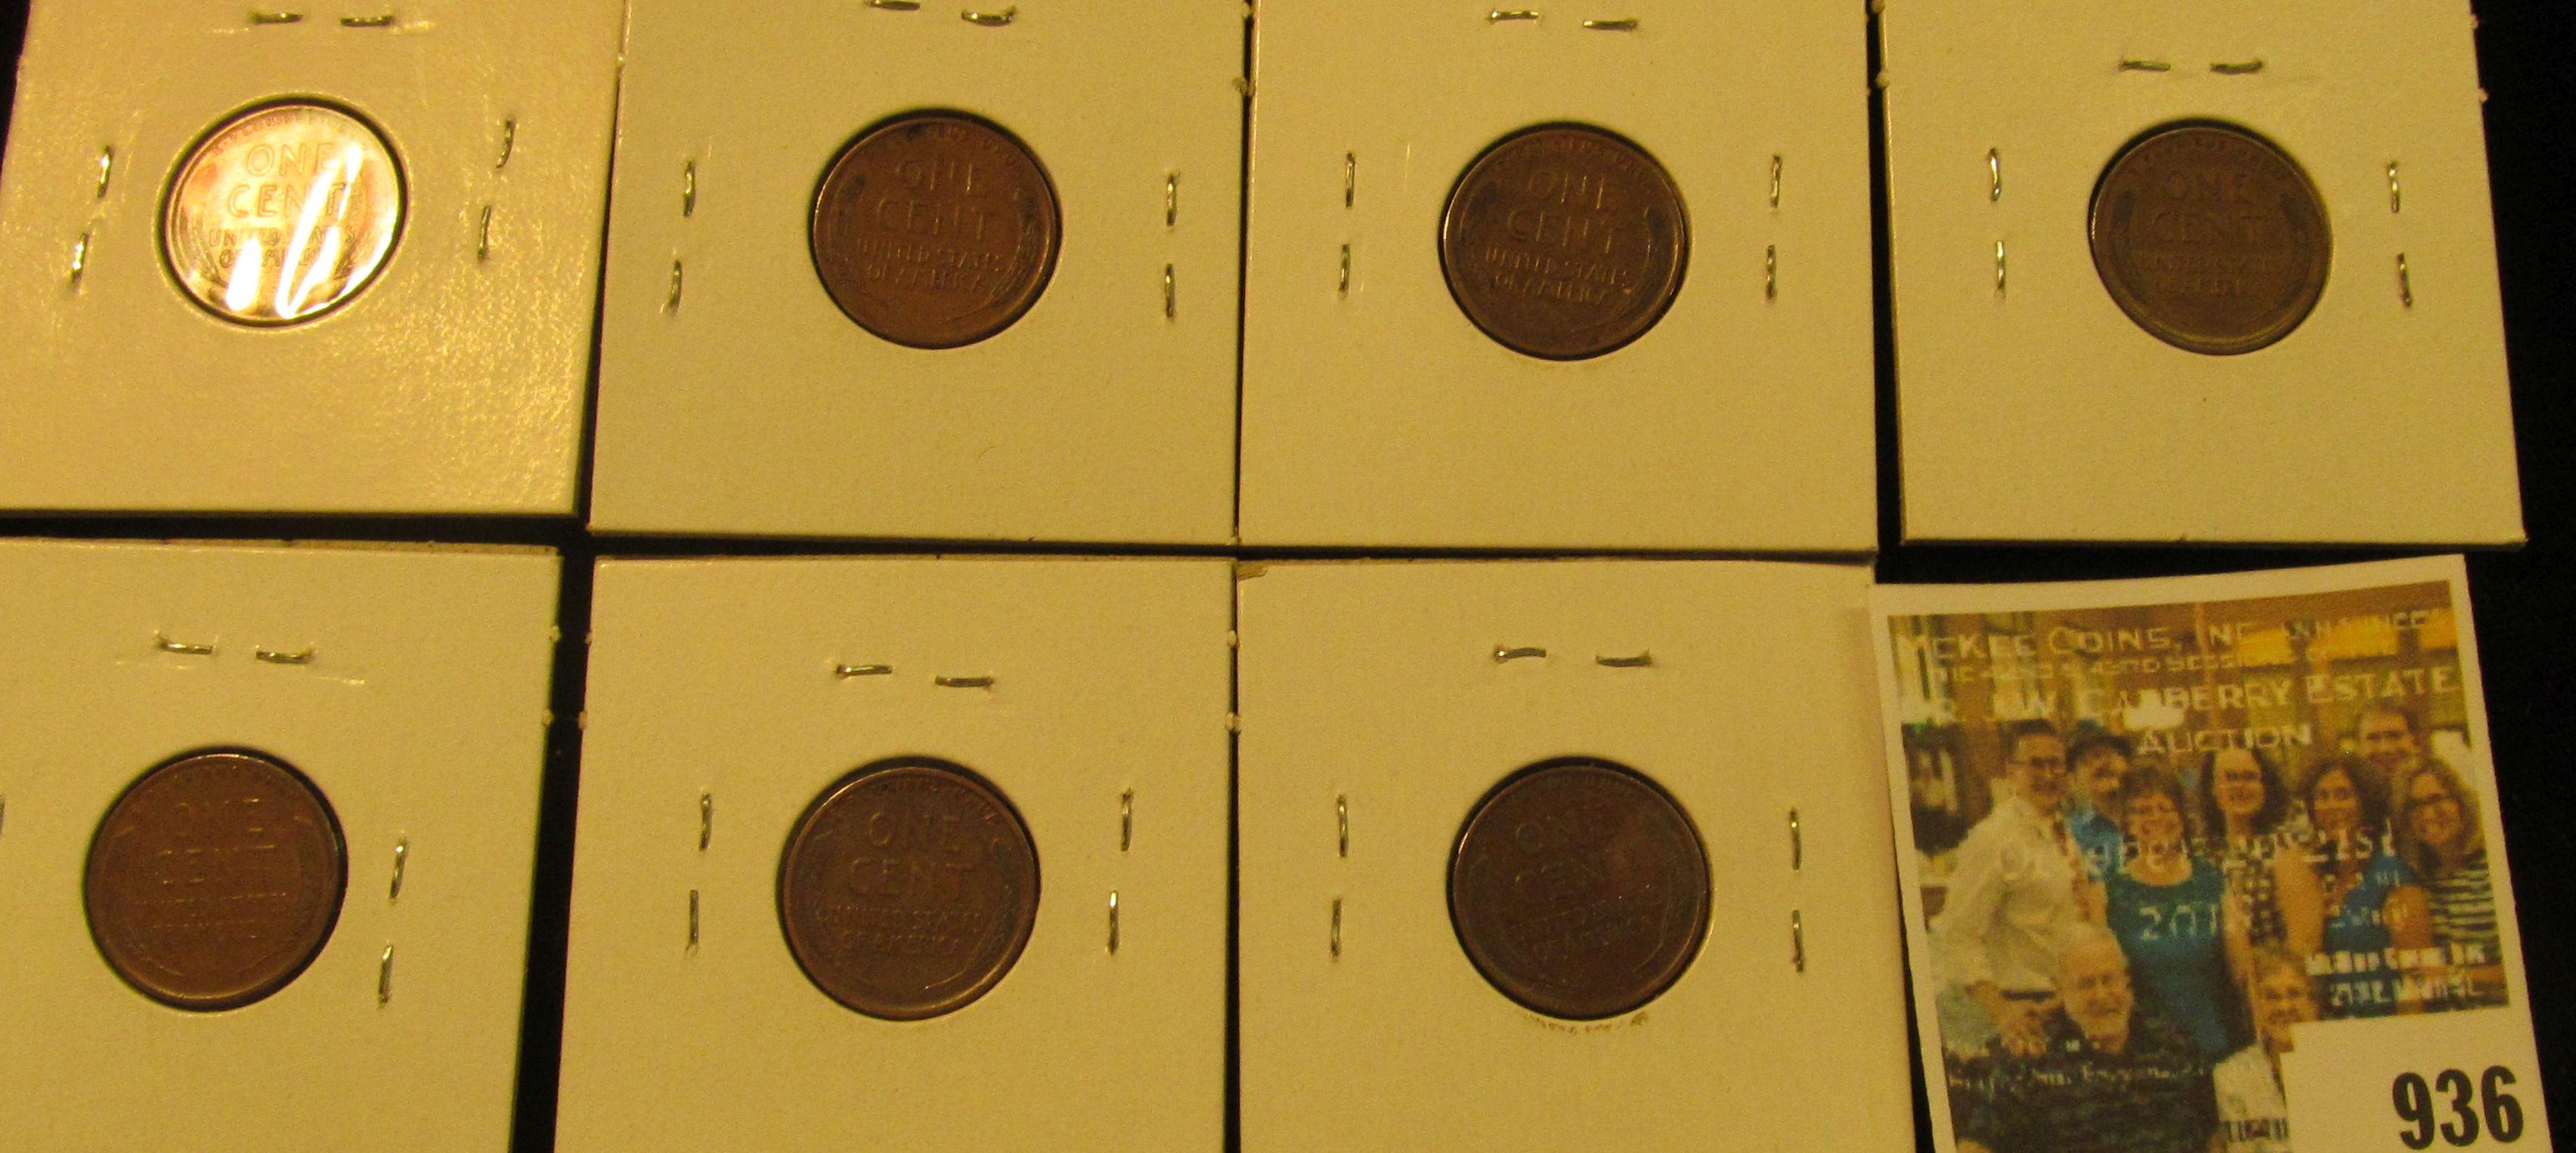 936 _ (7) 1919 P Lincoln Cents, all grading EF-AU. Nice Chocolate browns.